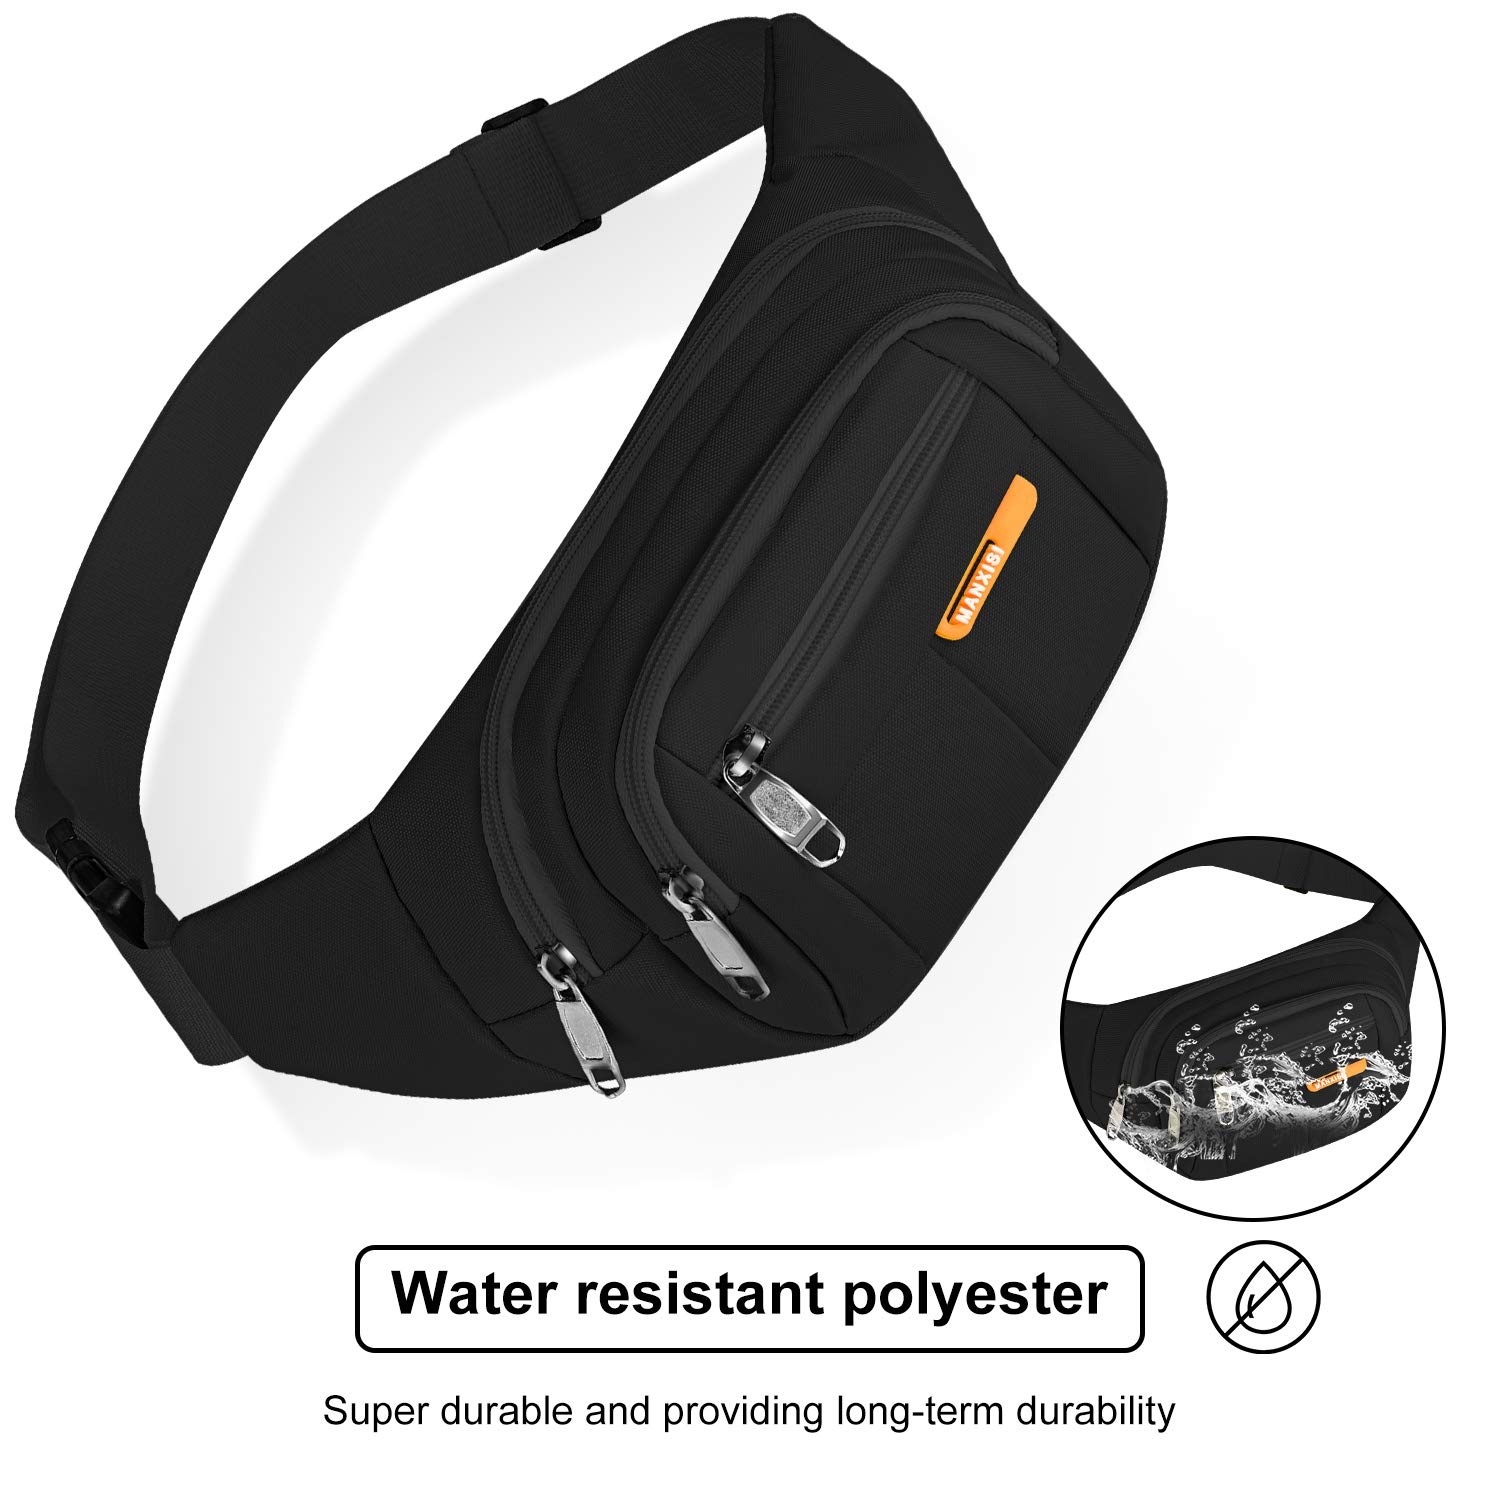 Fanny Pack for Men Women Waterproof Hip Bum Bag Waist Pack Bag Suitable for Outdoors Workout Traveling Casual Running Hiking Cycling Dog Walking Fishing(Black)